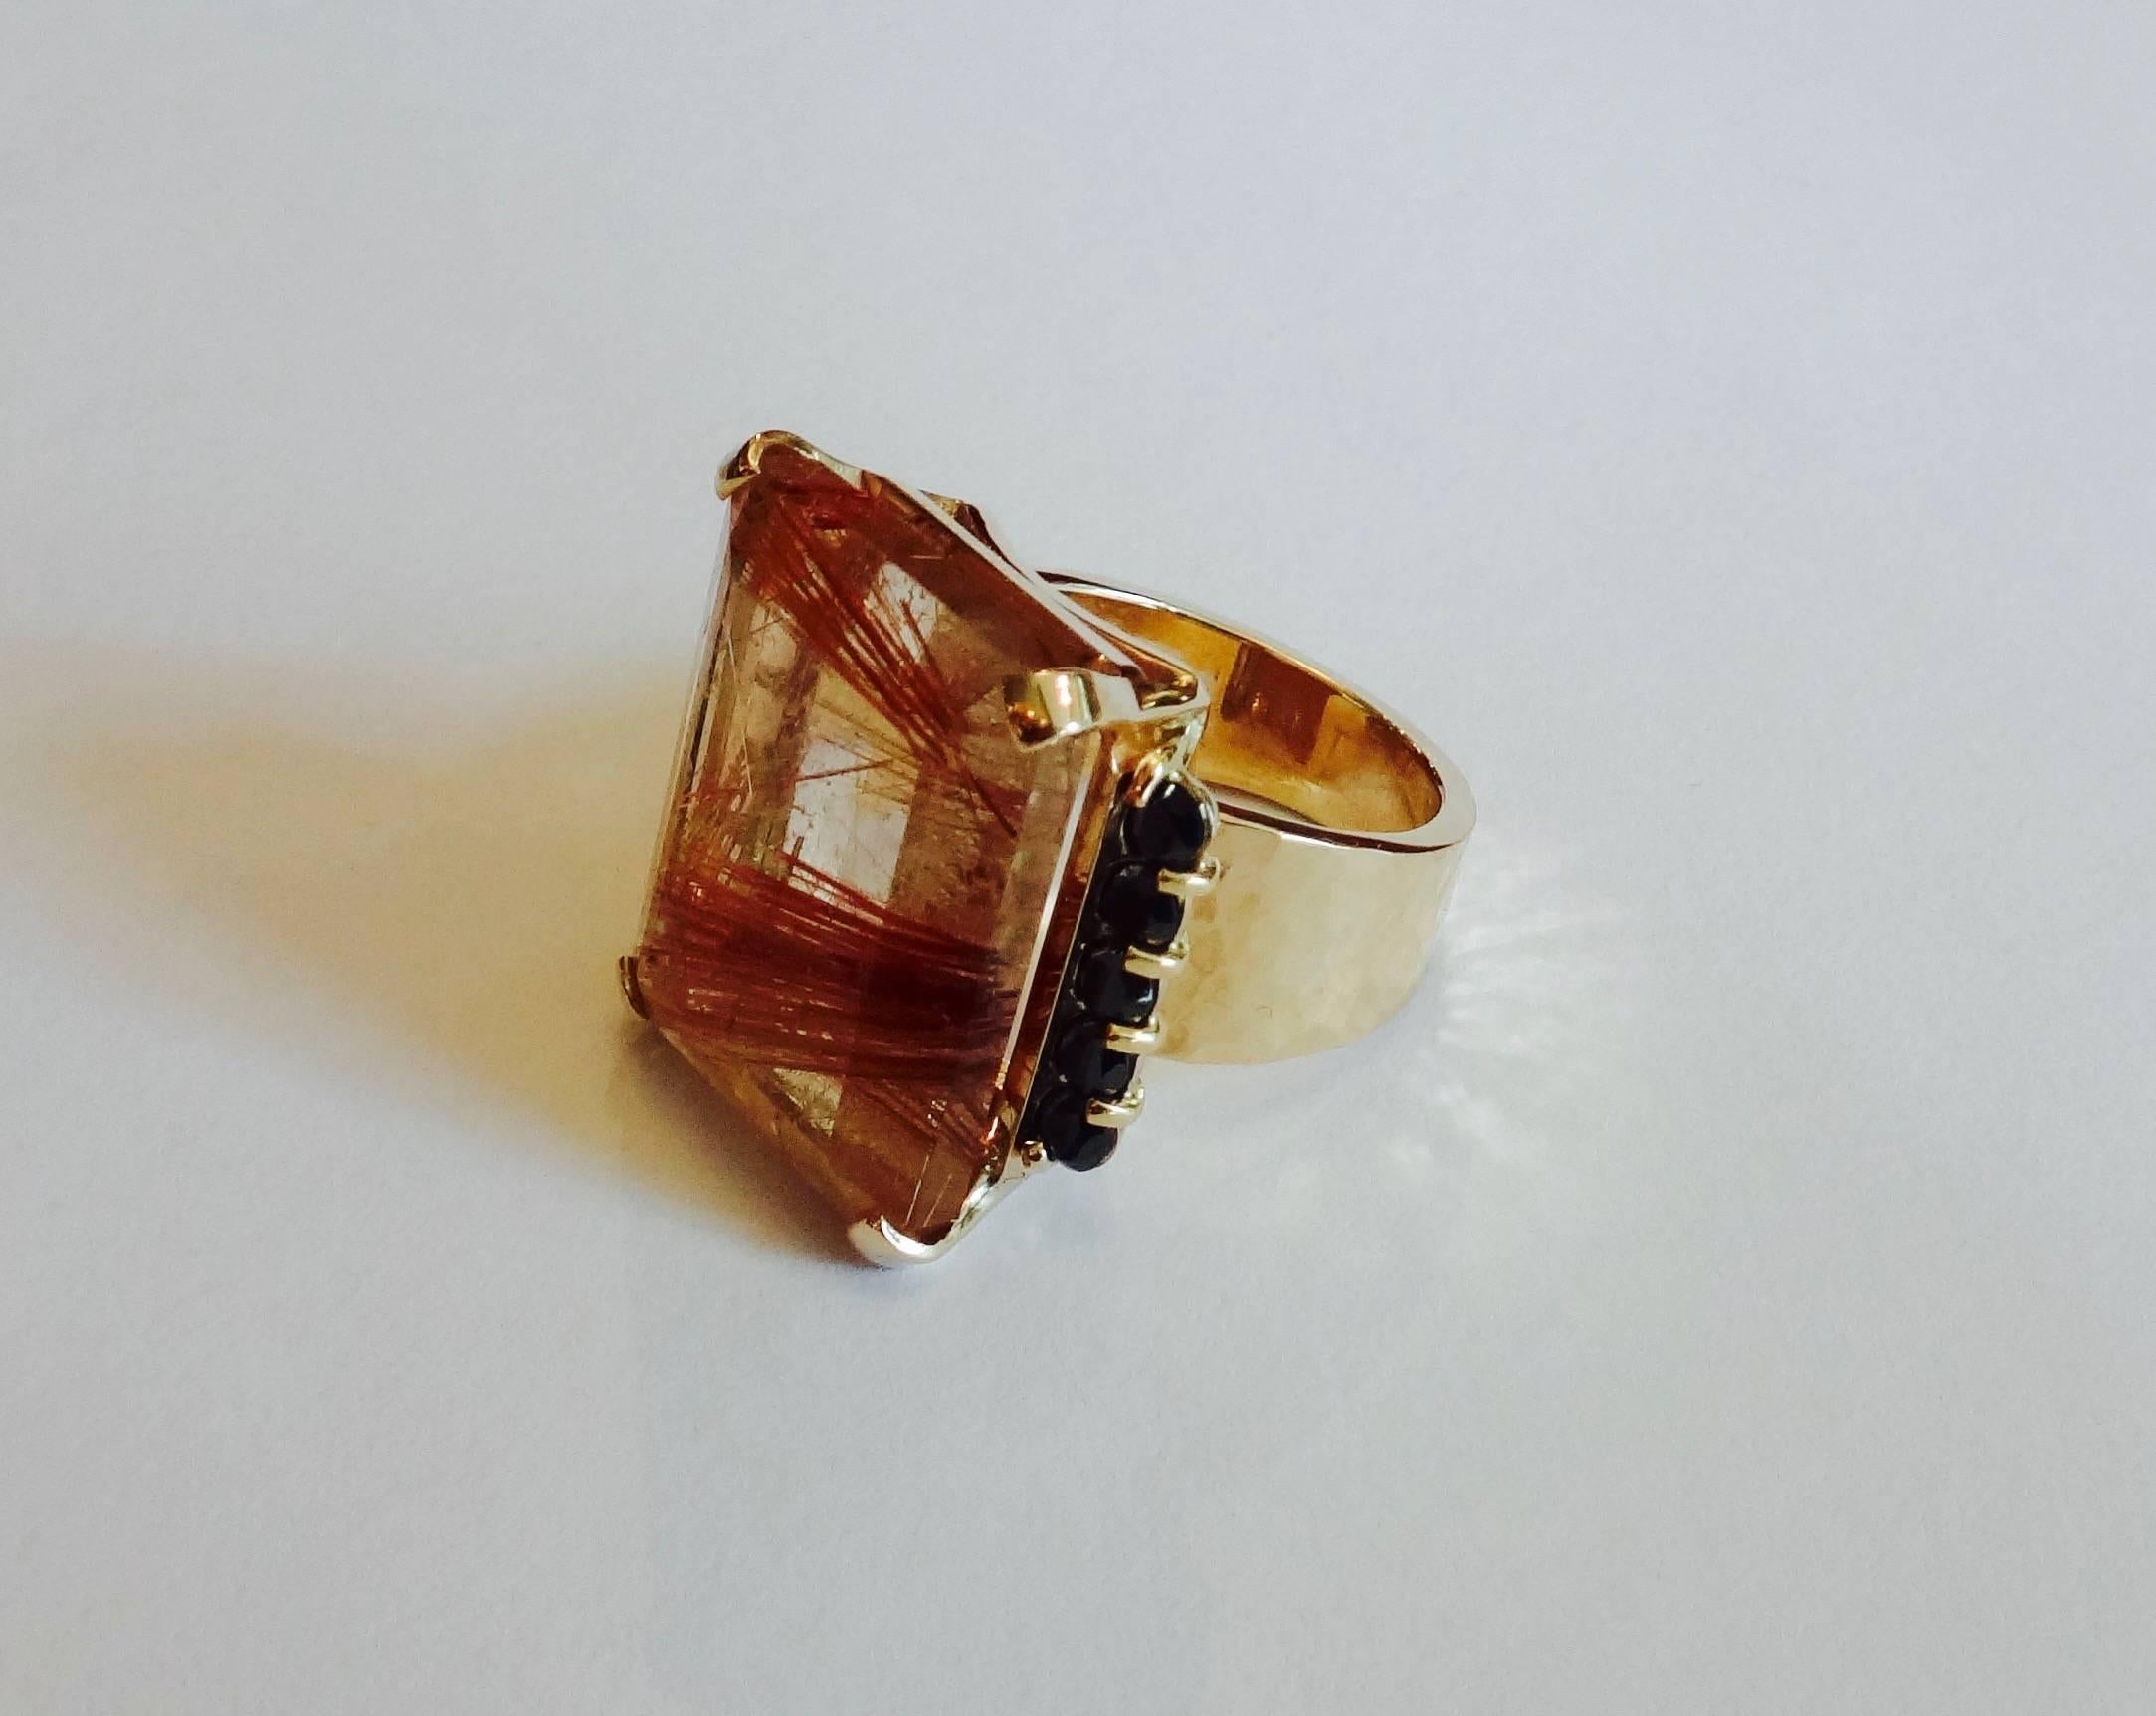 A dramatic copper colored, 53.77 carat rutilated quartz (needles of titanium dioxide trapped within clear quartz, origin: Brazil) is flanked by eight, brilliant cut black diamonds all set within a hand fabricated 18k hammered gold setting.  The ring